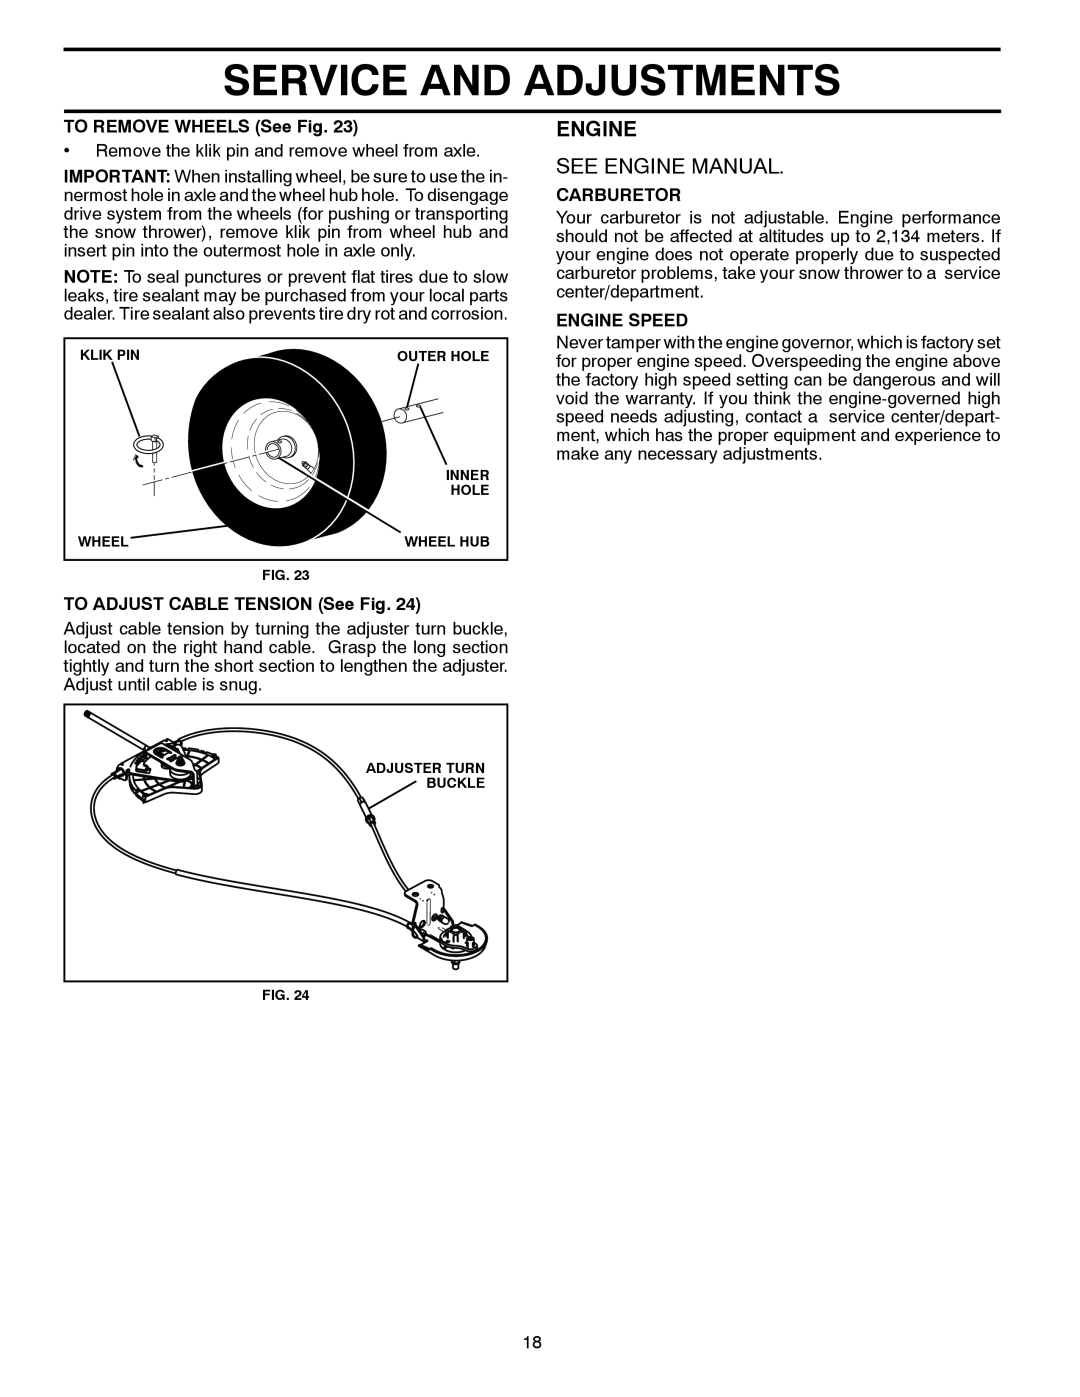 Poulan 428550 Service And Adjustments, See Engine Manual, TO REMOVE WHEELS See Fig, TO ADJUST CABLE TENSION See Fig 